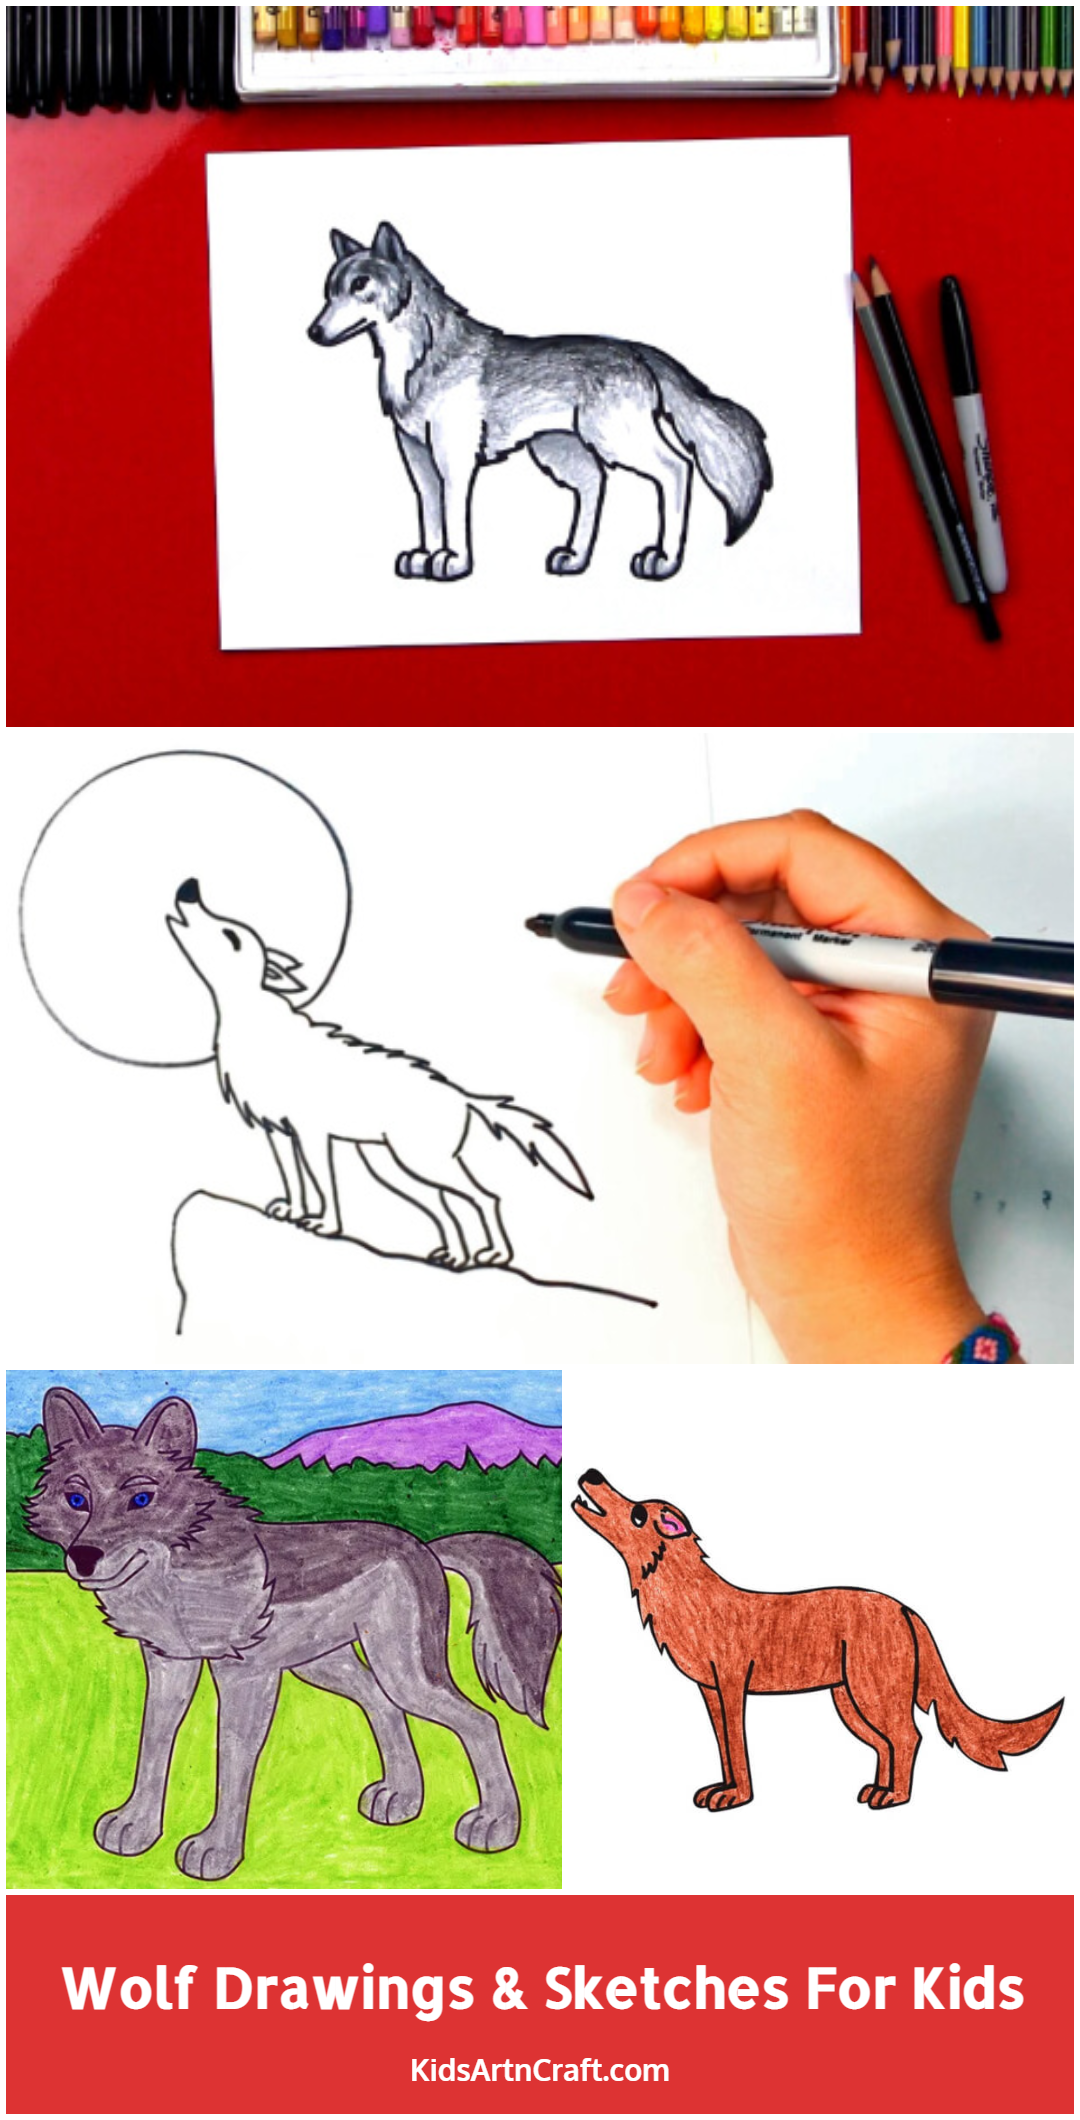 Wolf Drawings & Sketches For Kids